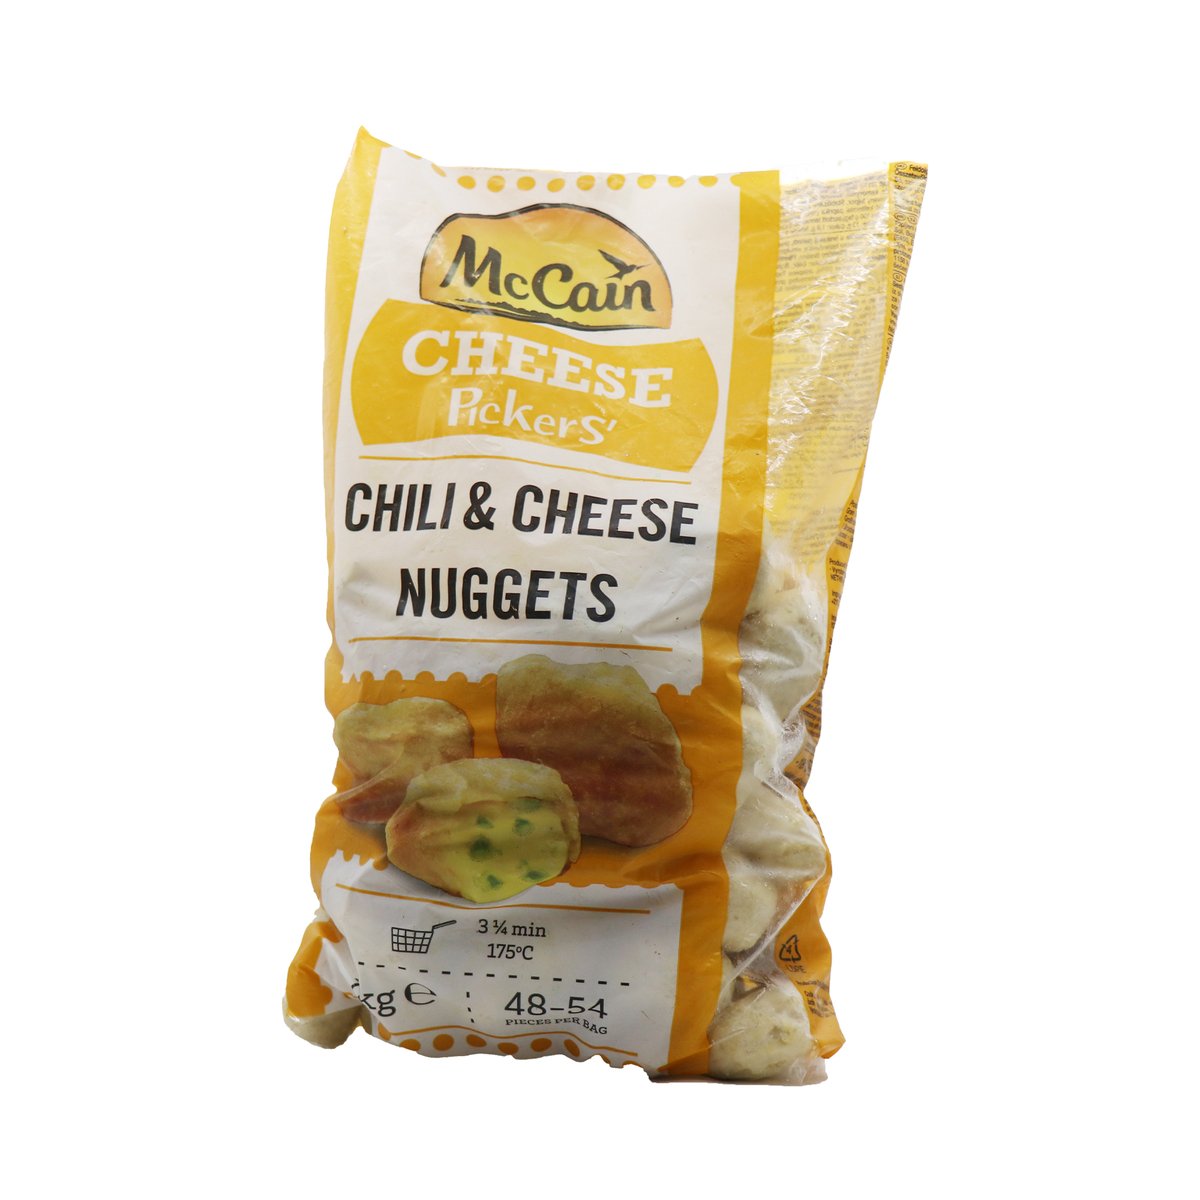 McCain Cheese PickerS' Chili & Cheese Nuggets 1kg